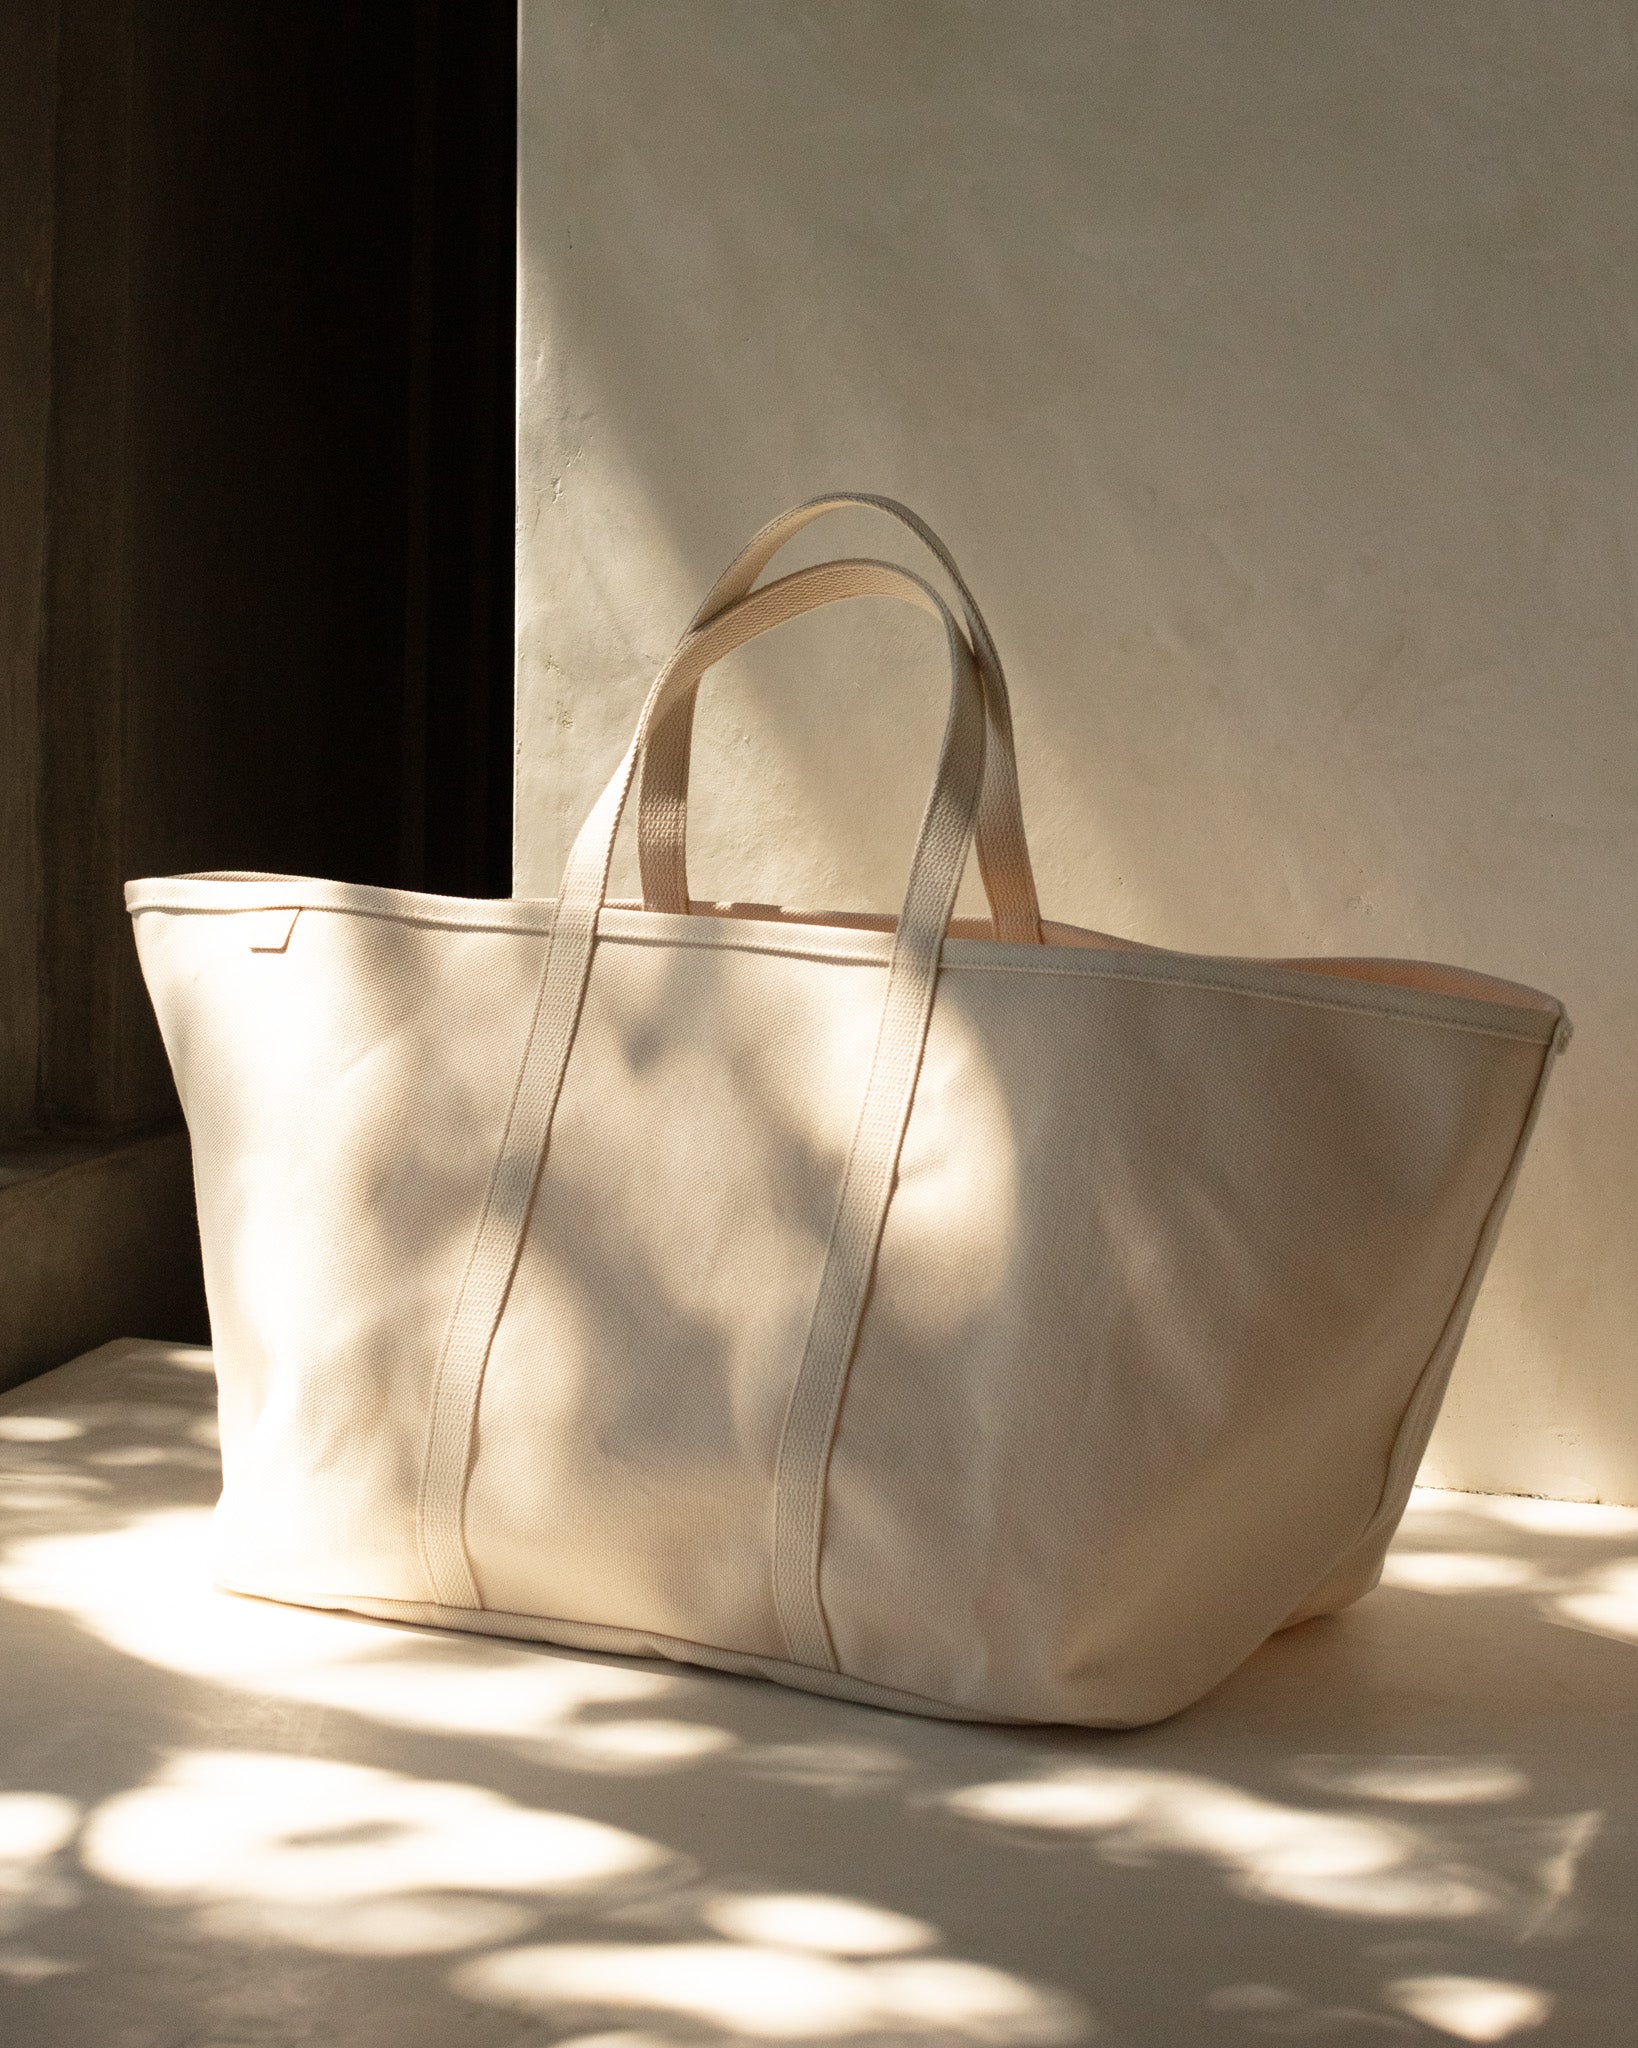 My Other Bag” Classic Tote $38